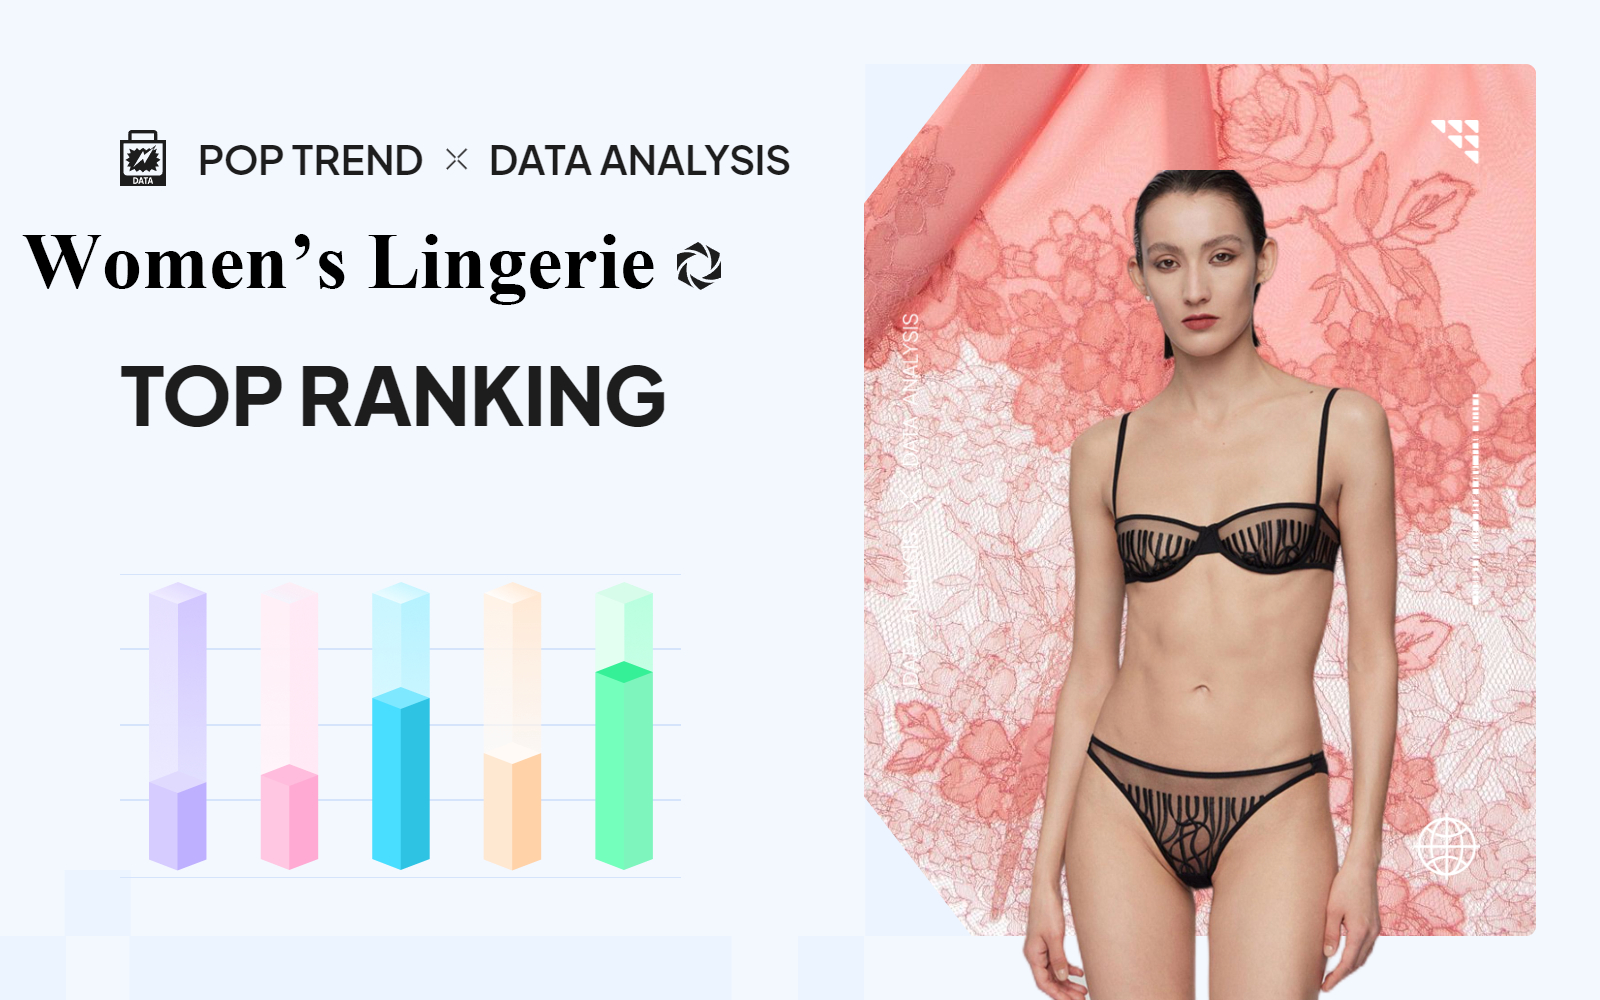 May 2023 -- The TOP Ranking of Women's Lingerie